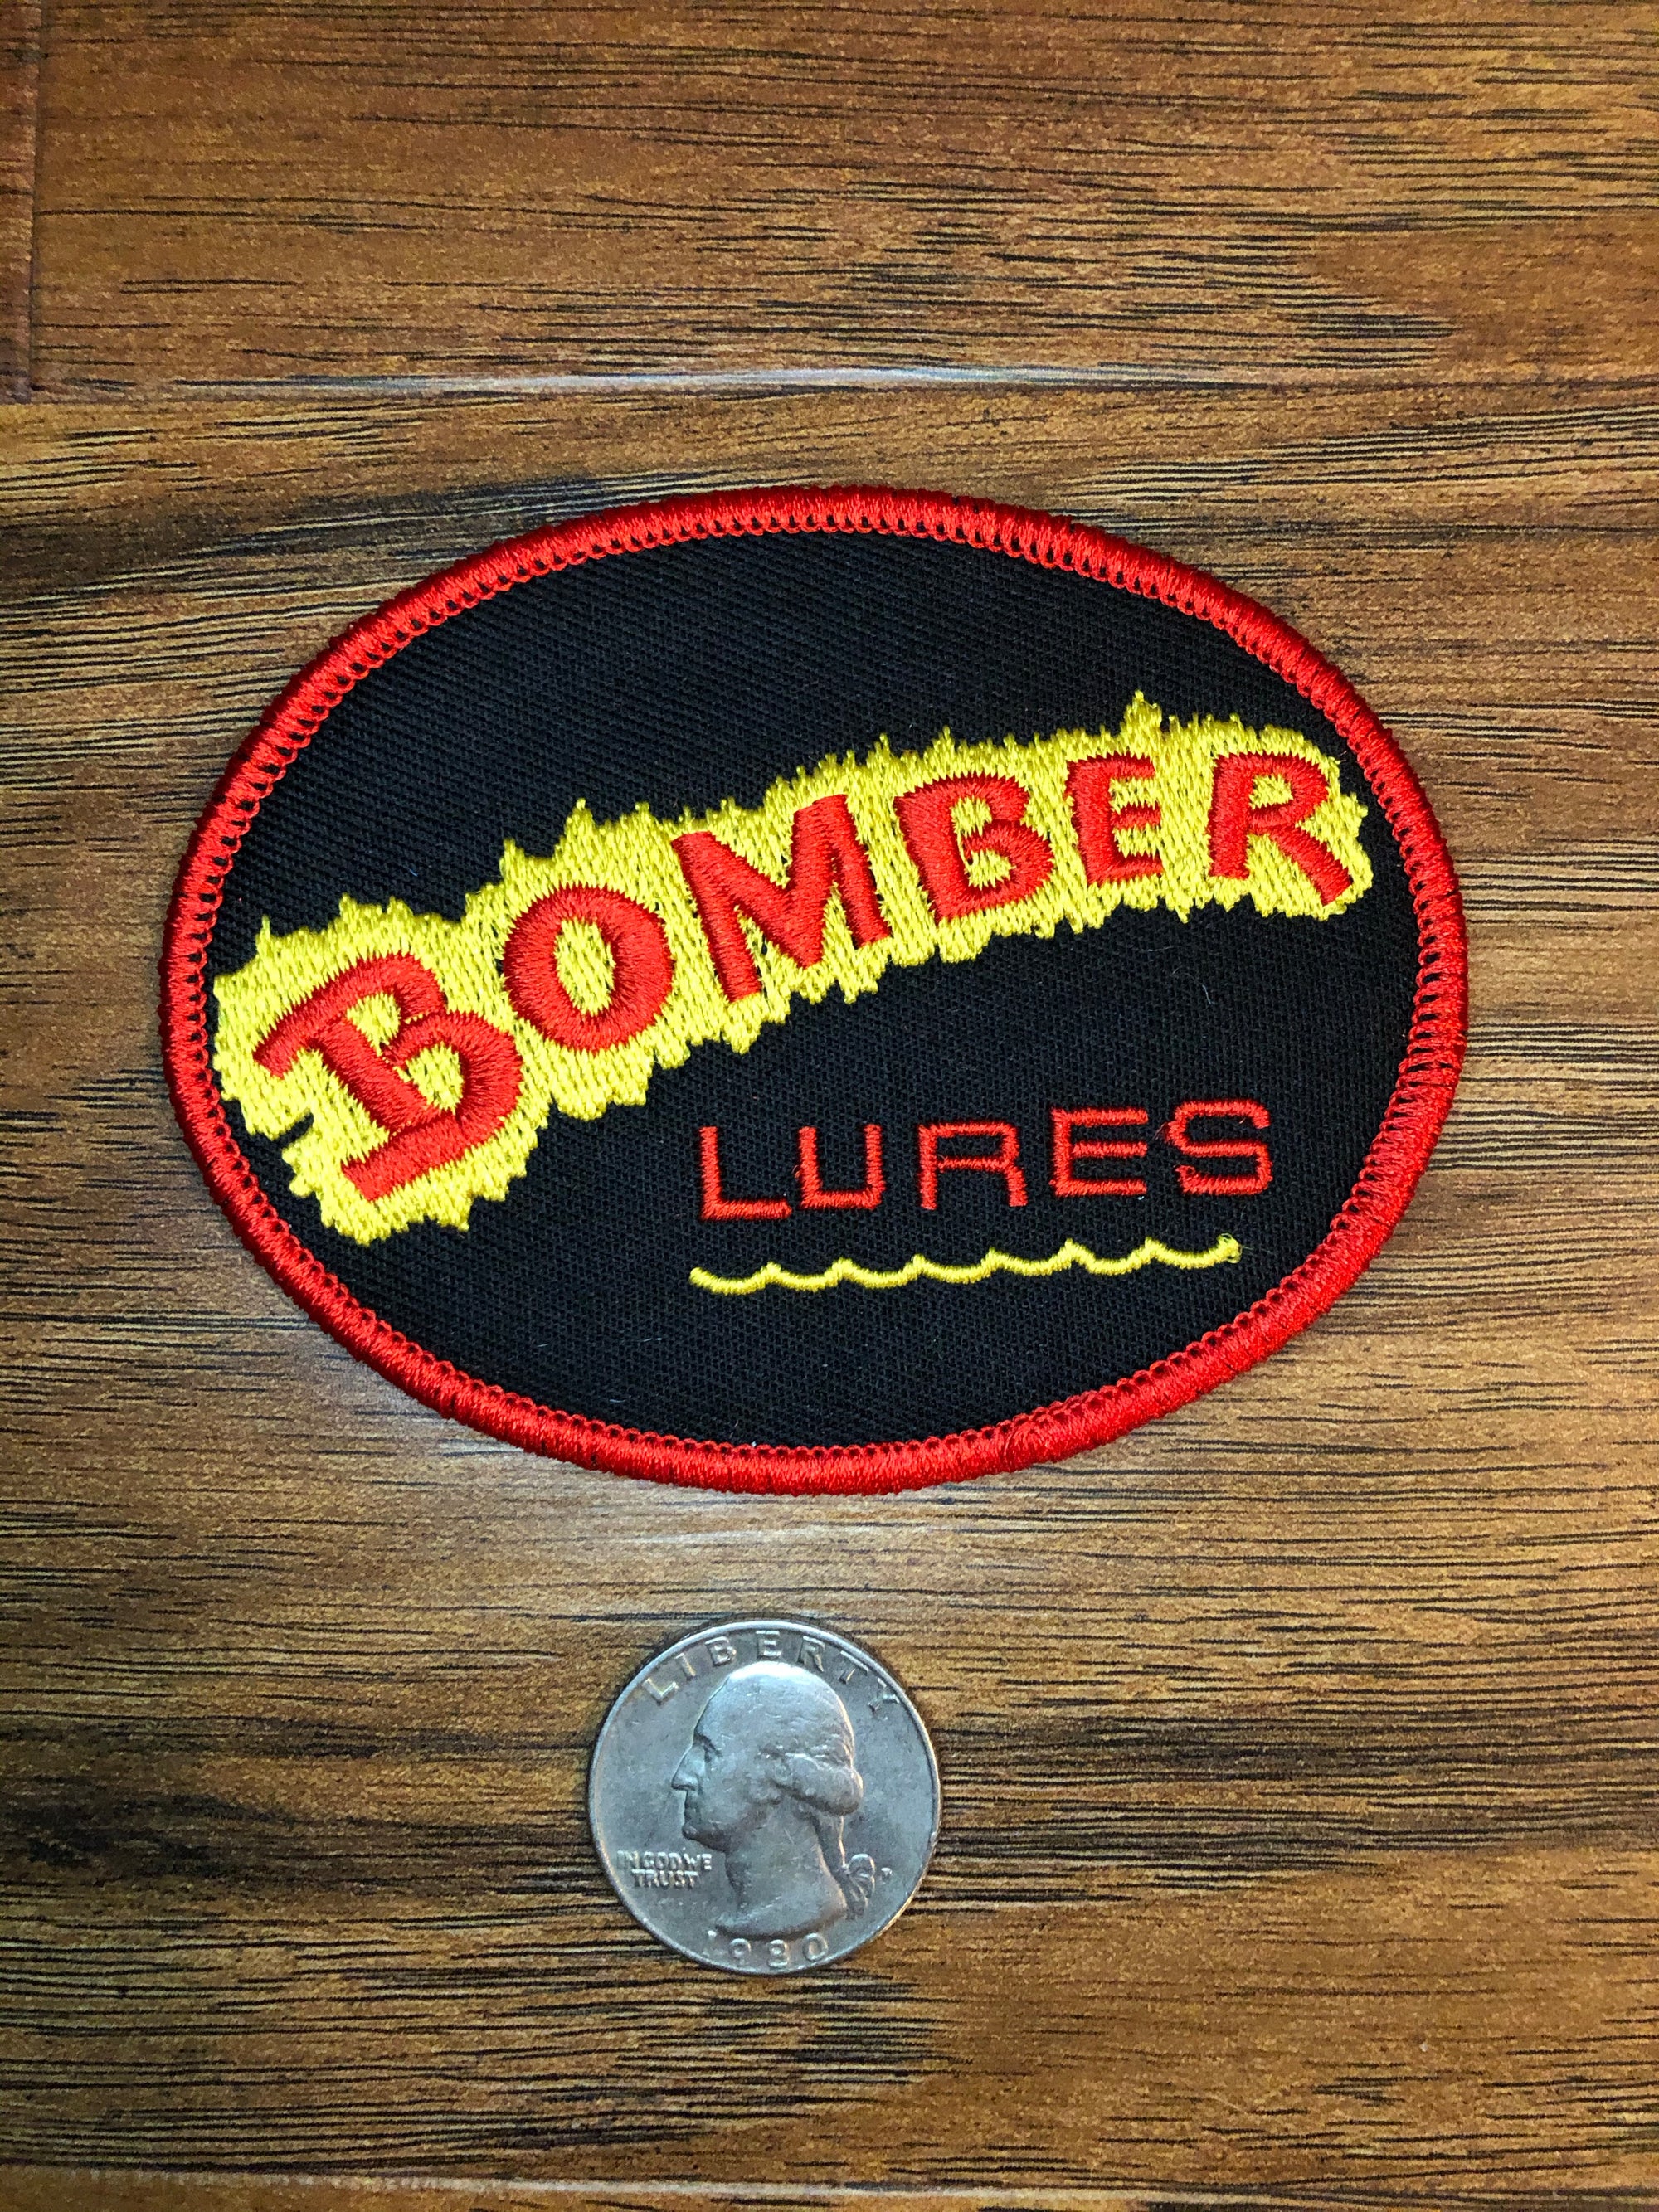 Bomber Lures, Fishing, Fish, Water, Lakes, Rods